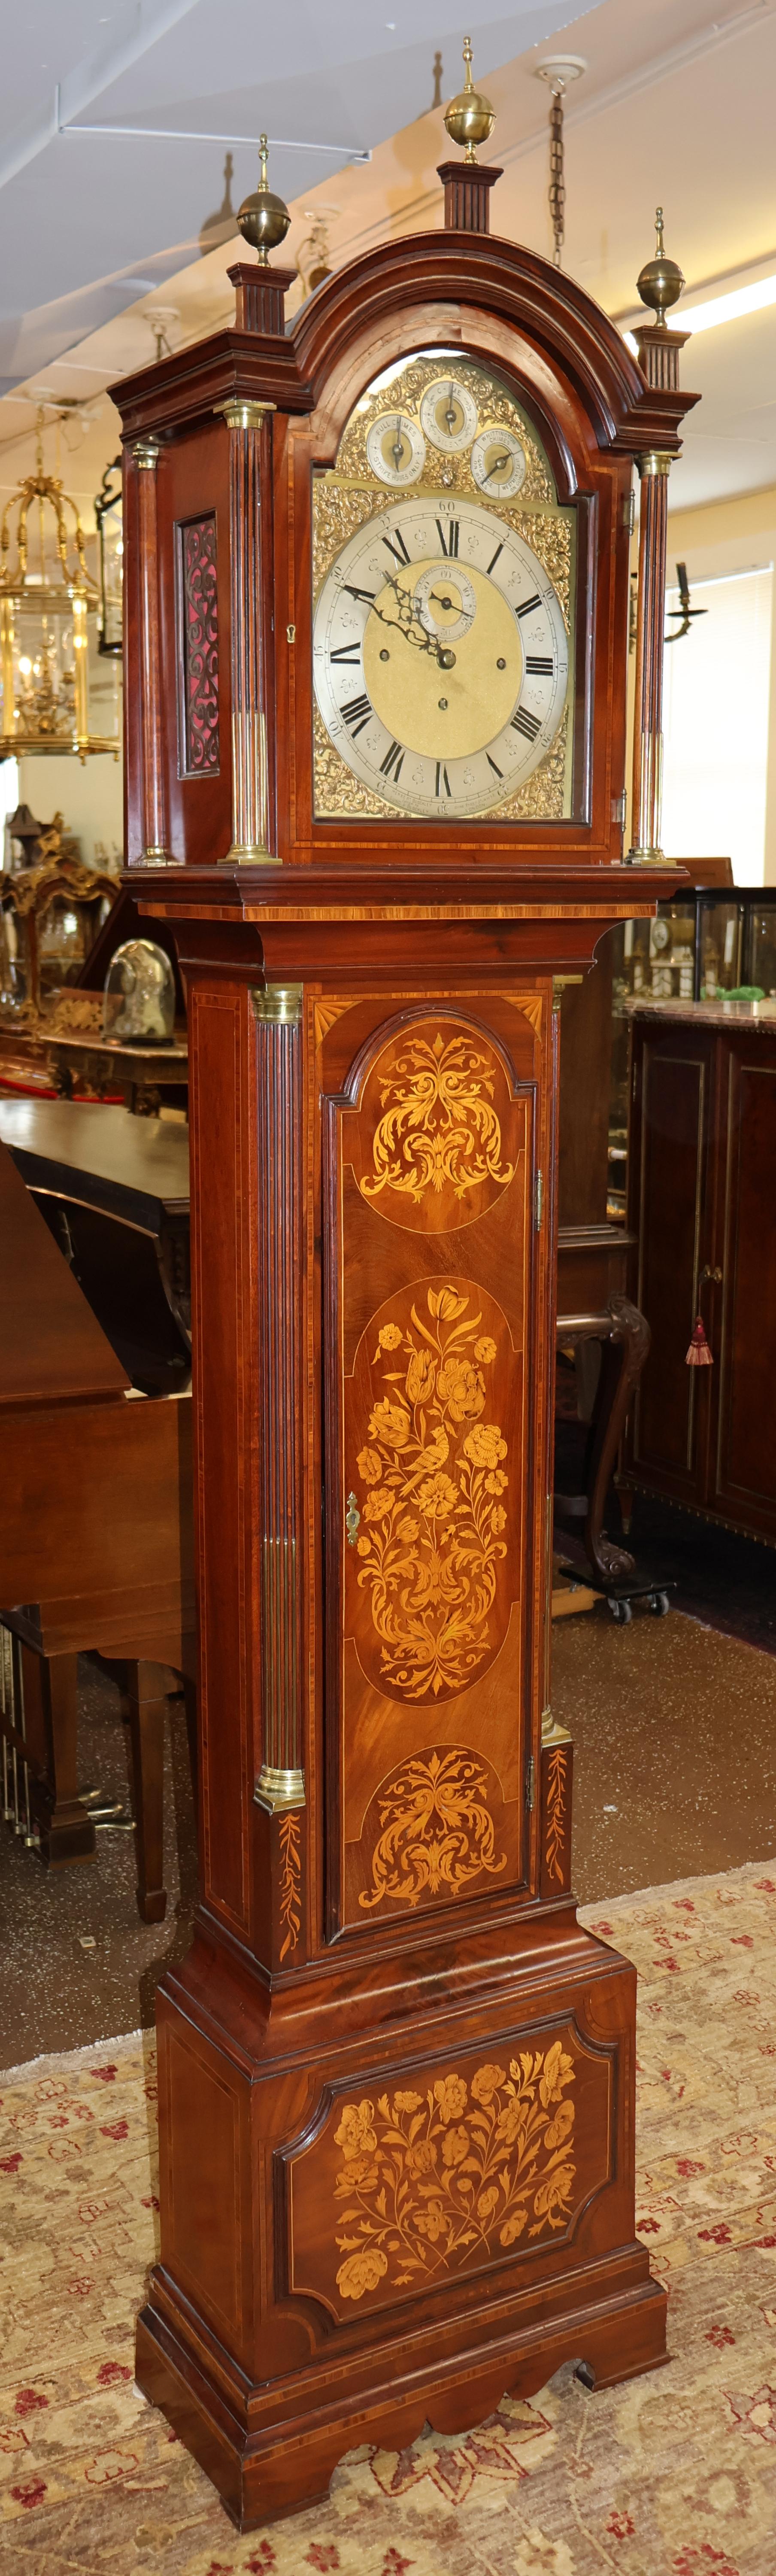 English Herbert Blockley London Musical 19th Century Inlaid Tall Case Grandfather Clock For Sale